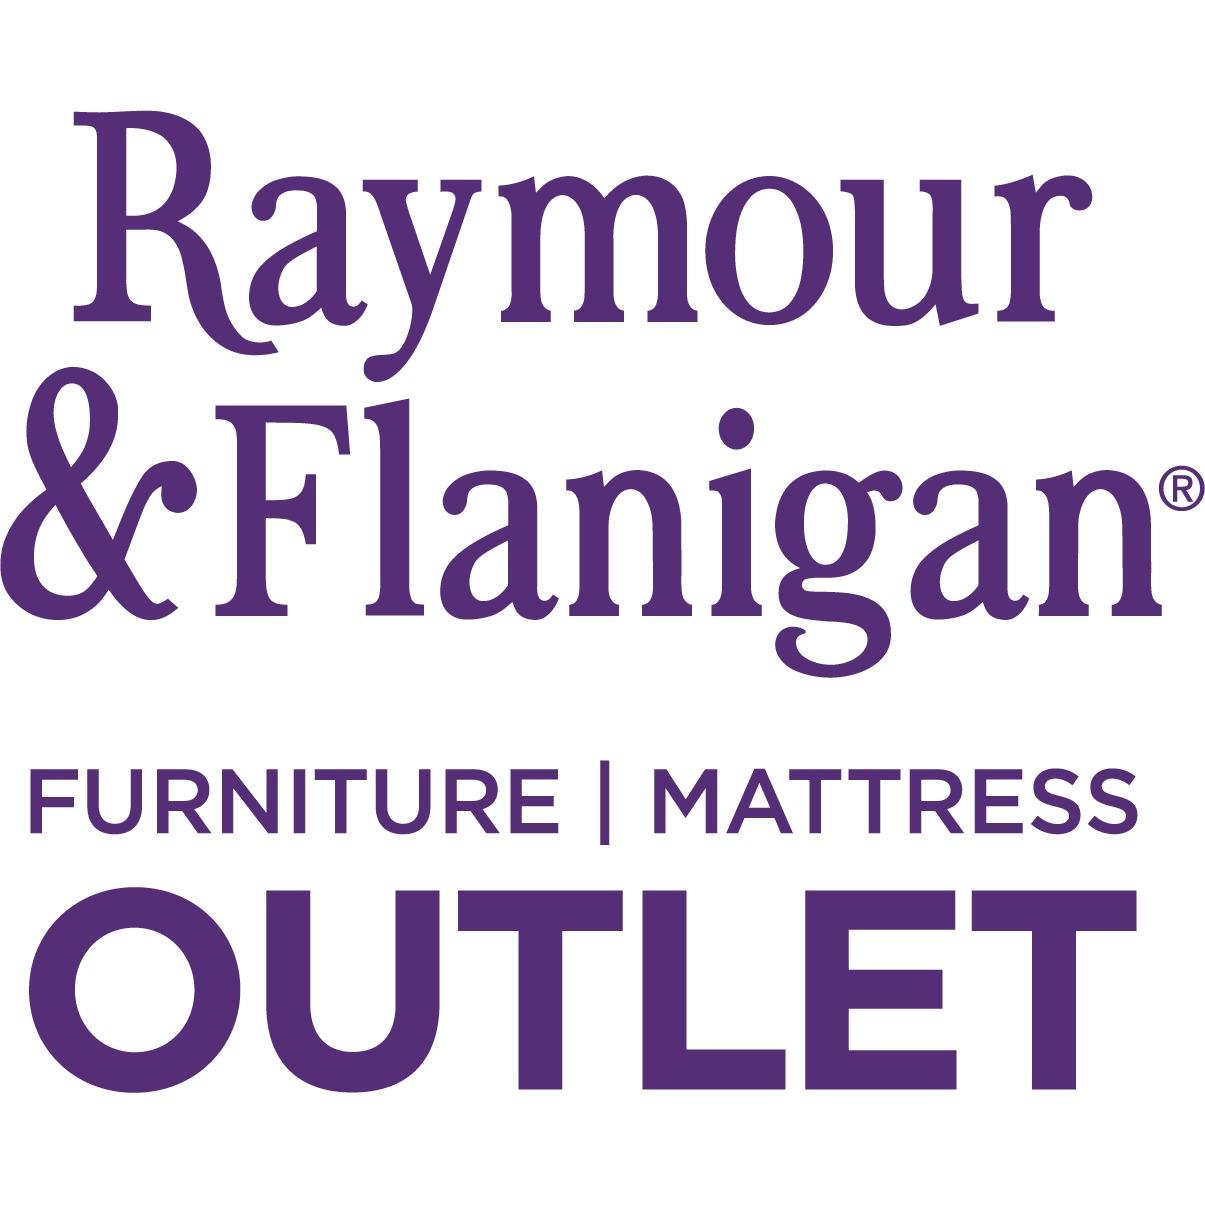 Raymour & Flanigan Furniture and Mattress Outlet | 3464 McKinley Pkwy, Buffalo, NY, 14219 | +1 (716) 206-8931